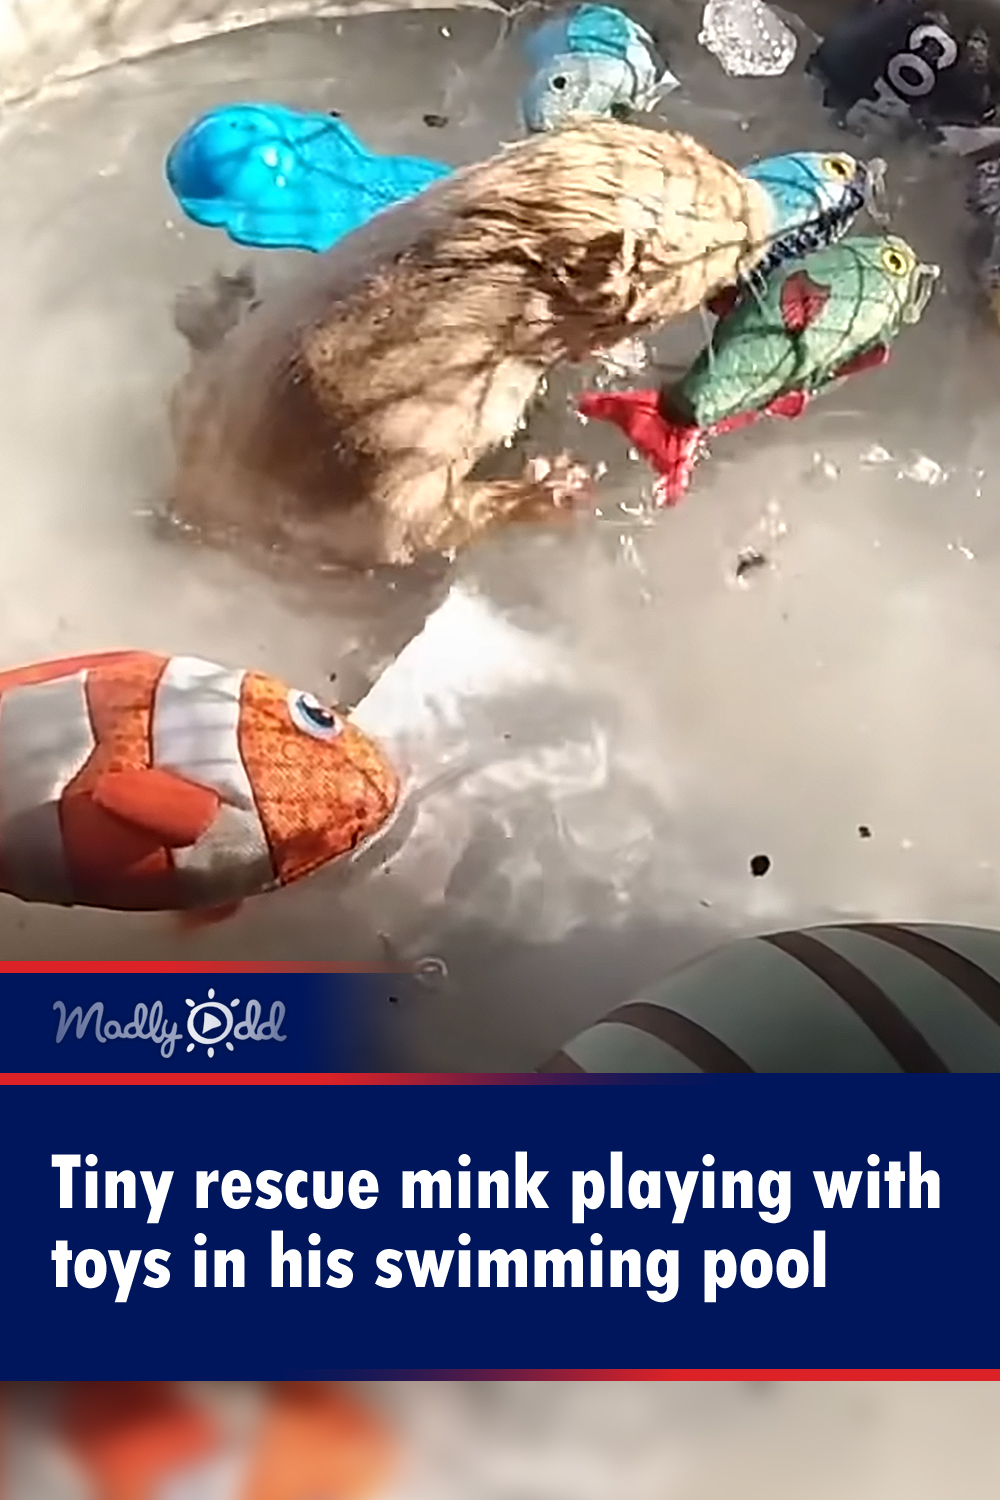 Tiny rescue mink playing with toys in his swimming pool